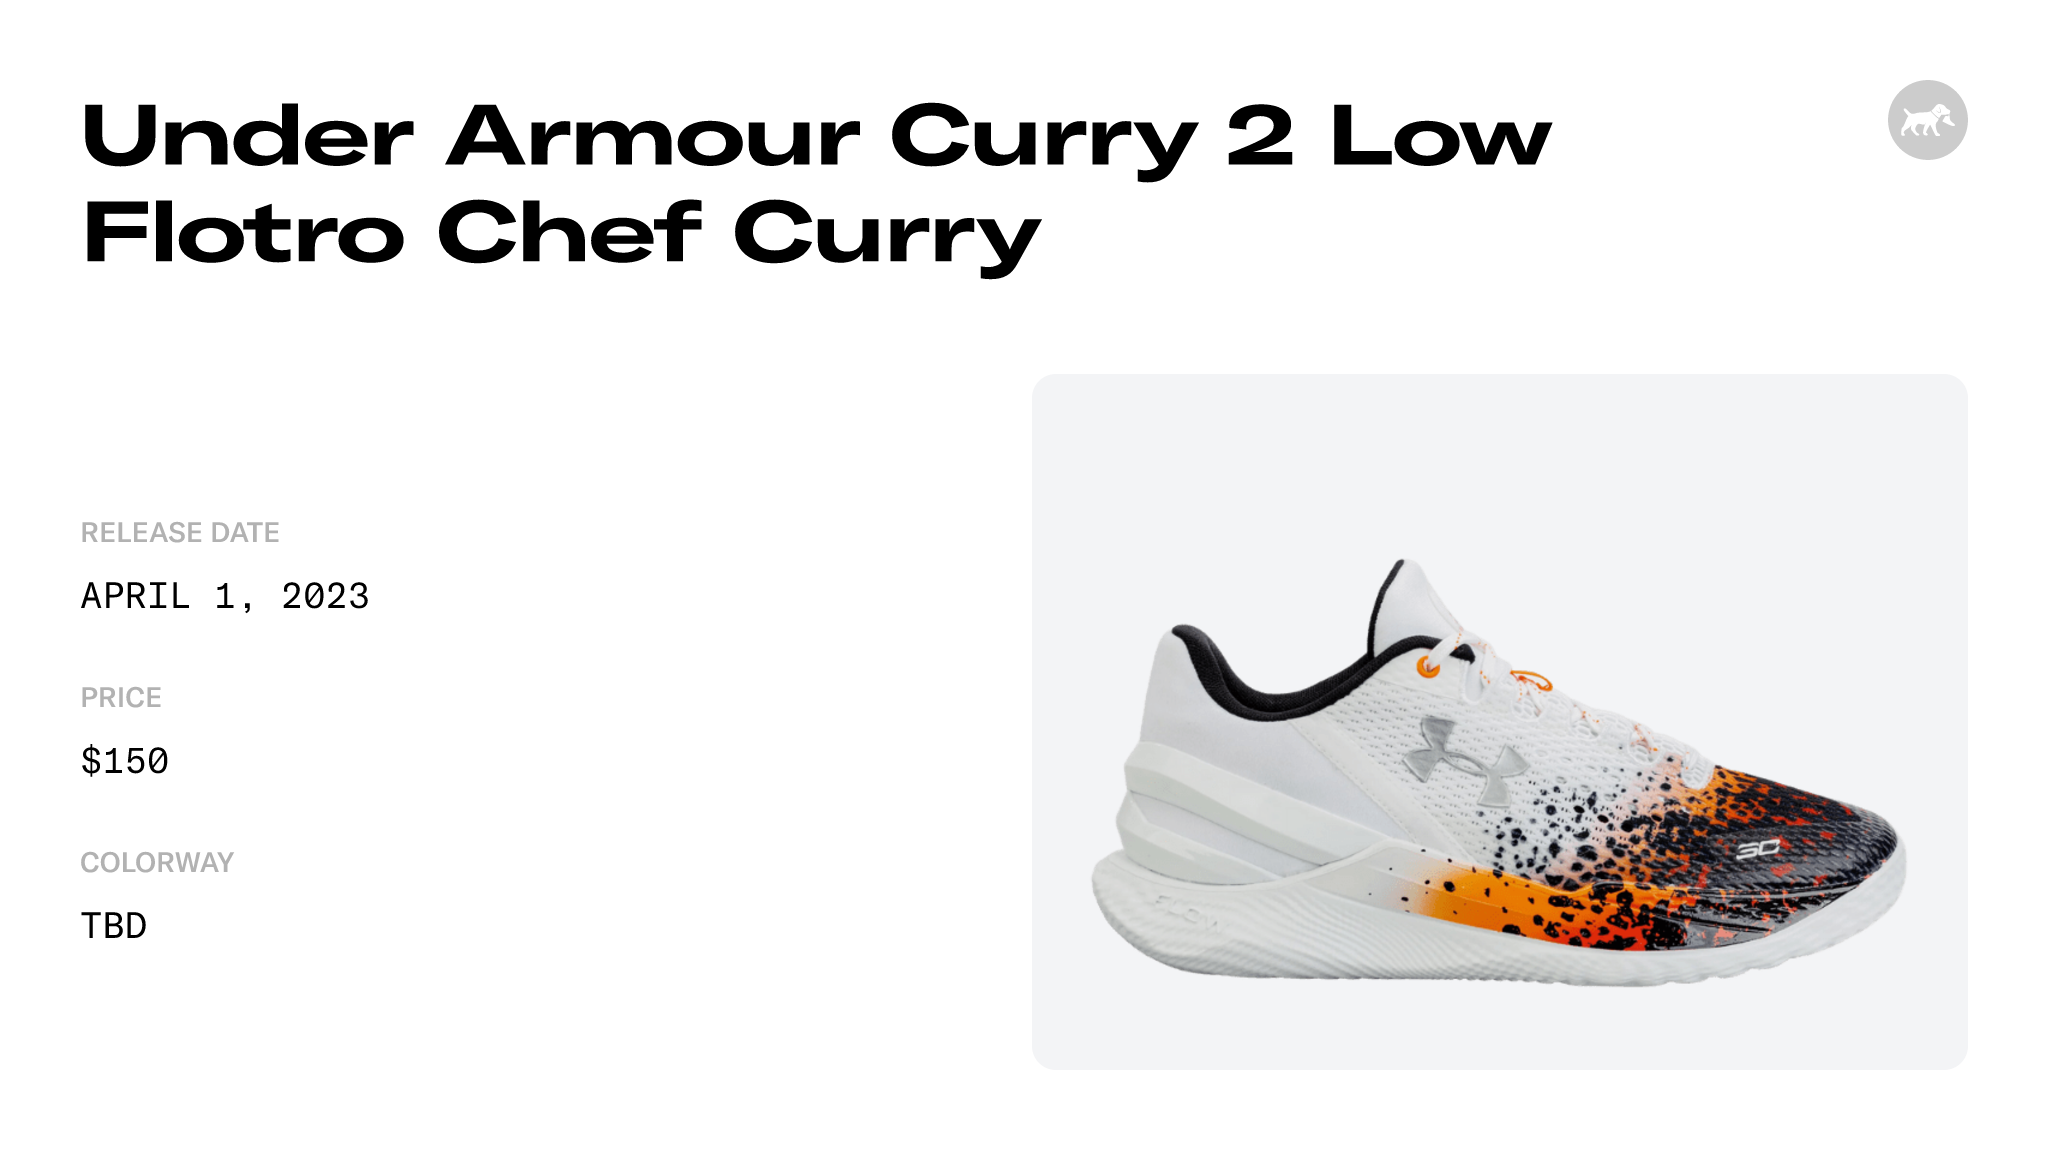 Under Armour Curry 2 Low Flotro Chef Curry - 3026277-100 Raffles and  Release Date